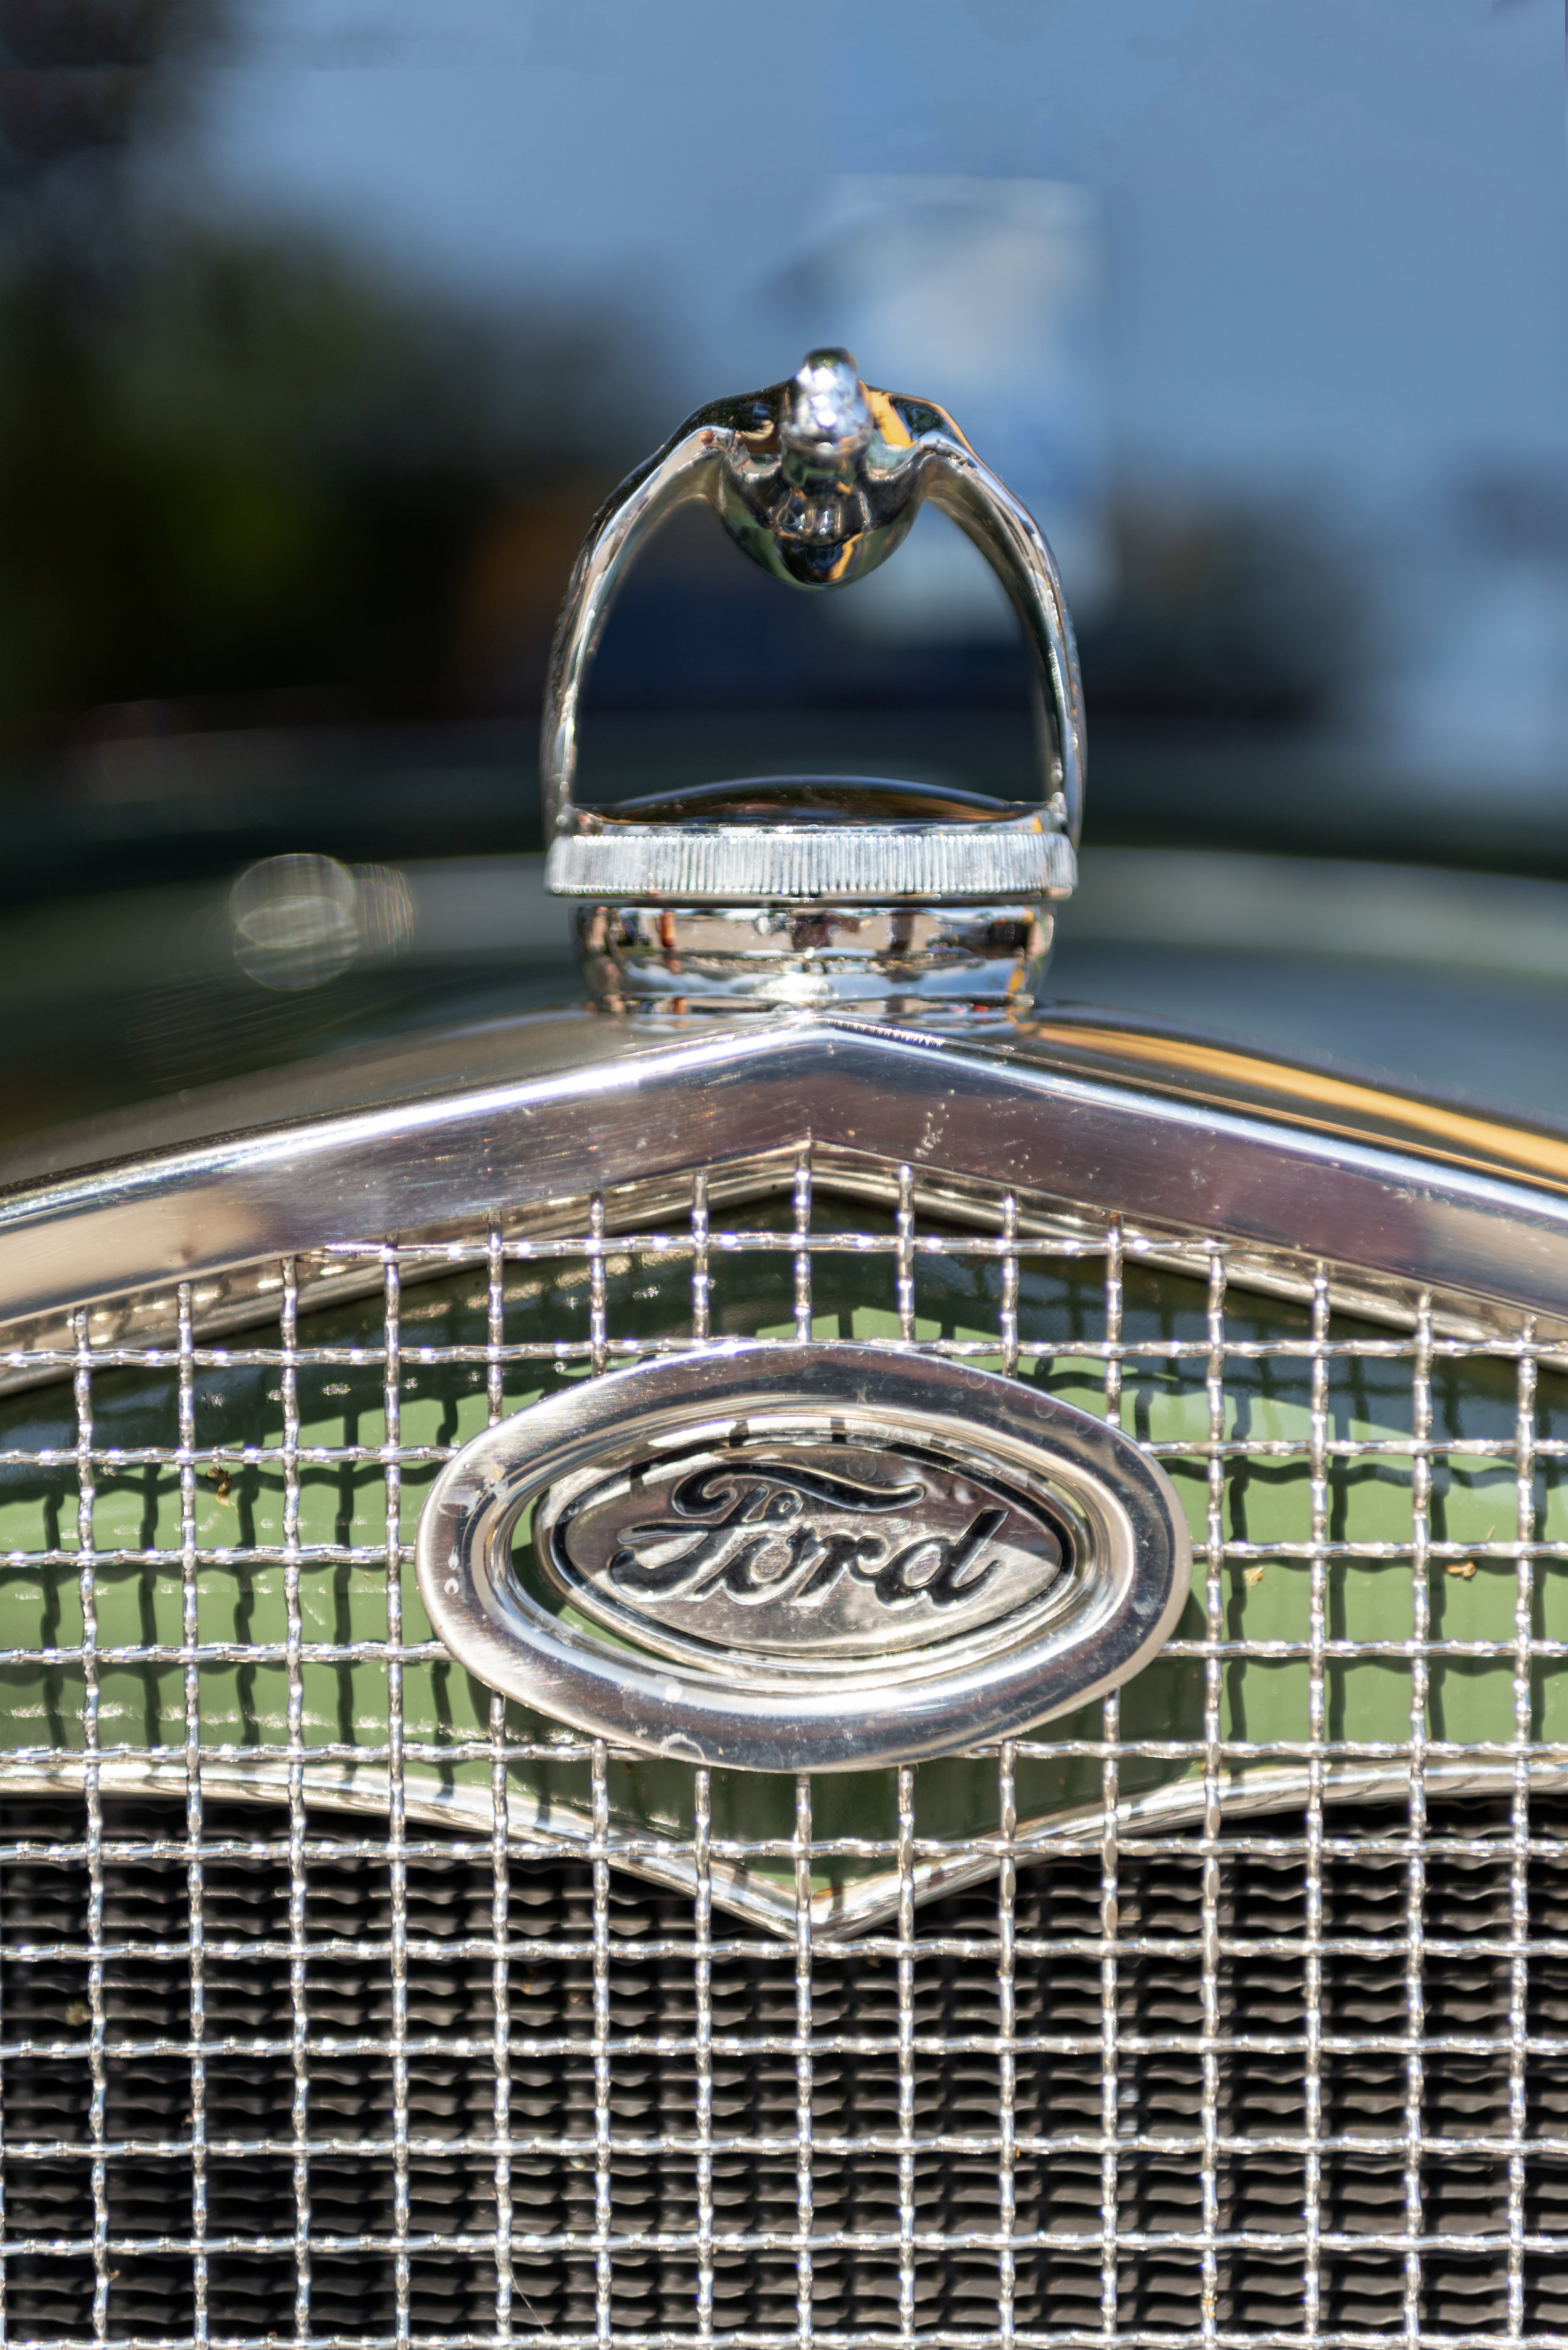   Ford Badge, Grill and Radiator Cap.  